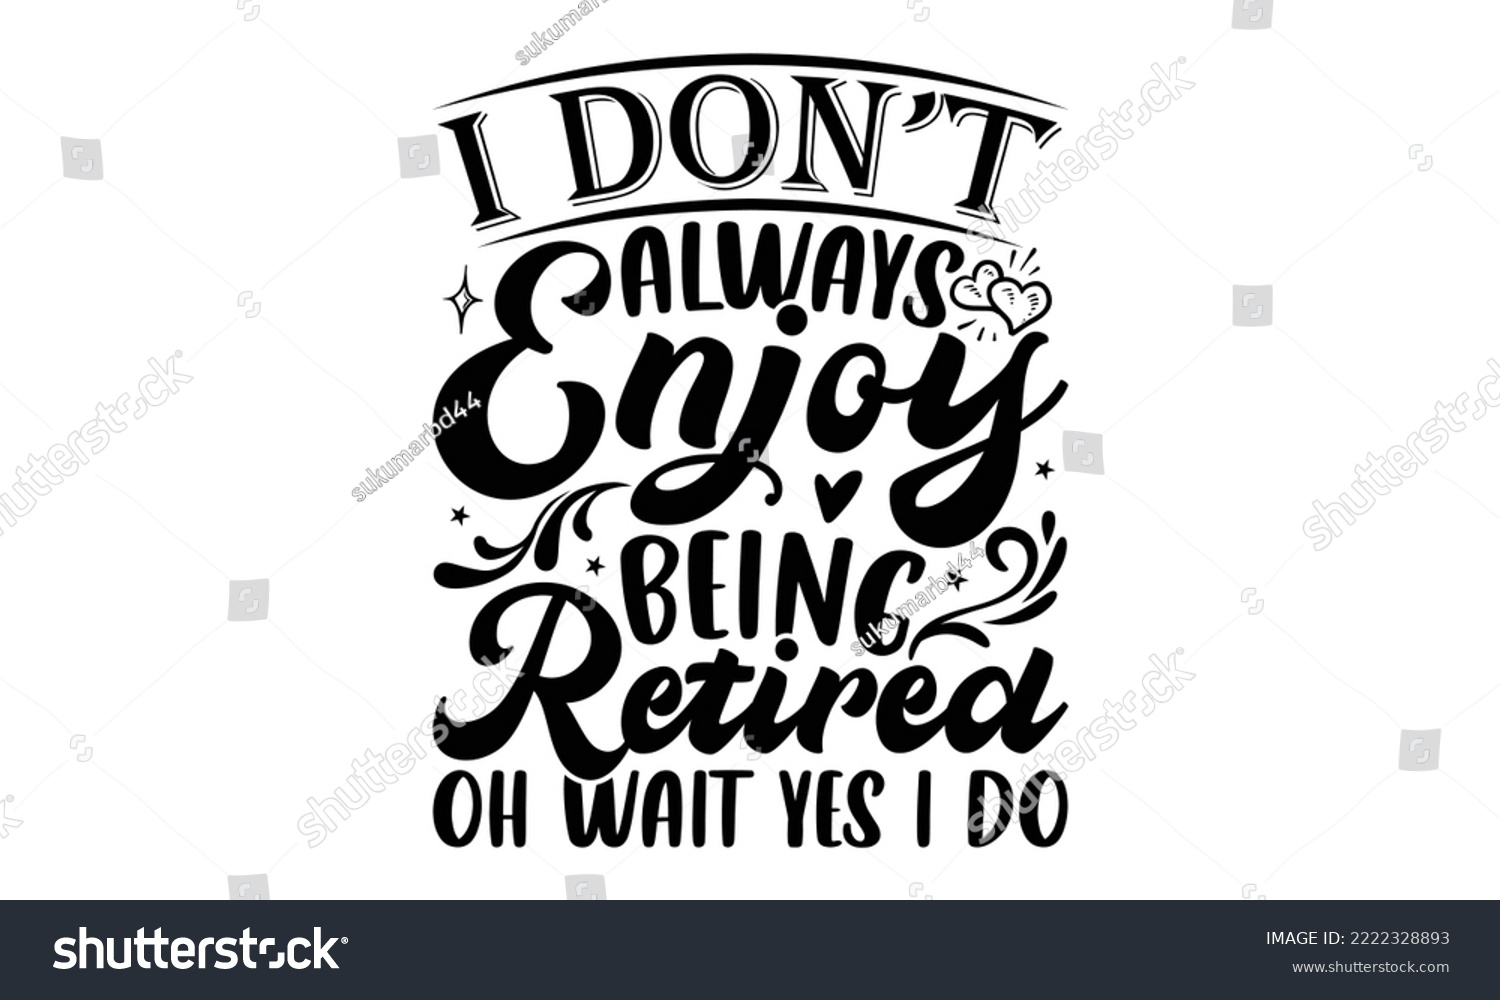 SVG of I Don’t Always Enjoy Being Retired Oh Wait Yes I Do - Retirement SVG Design, Hand drawn lettering phrase isolated on white background, typography t shirt design, eps, Files for Cutting svg